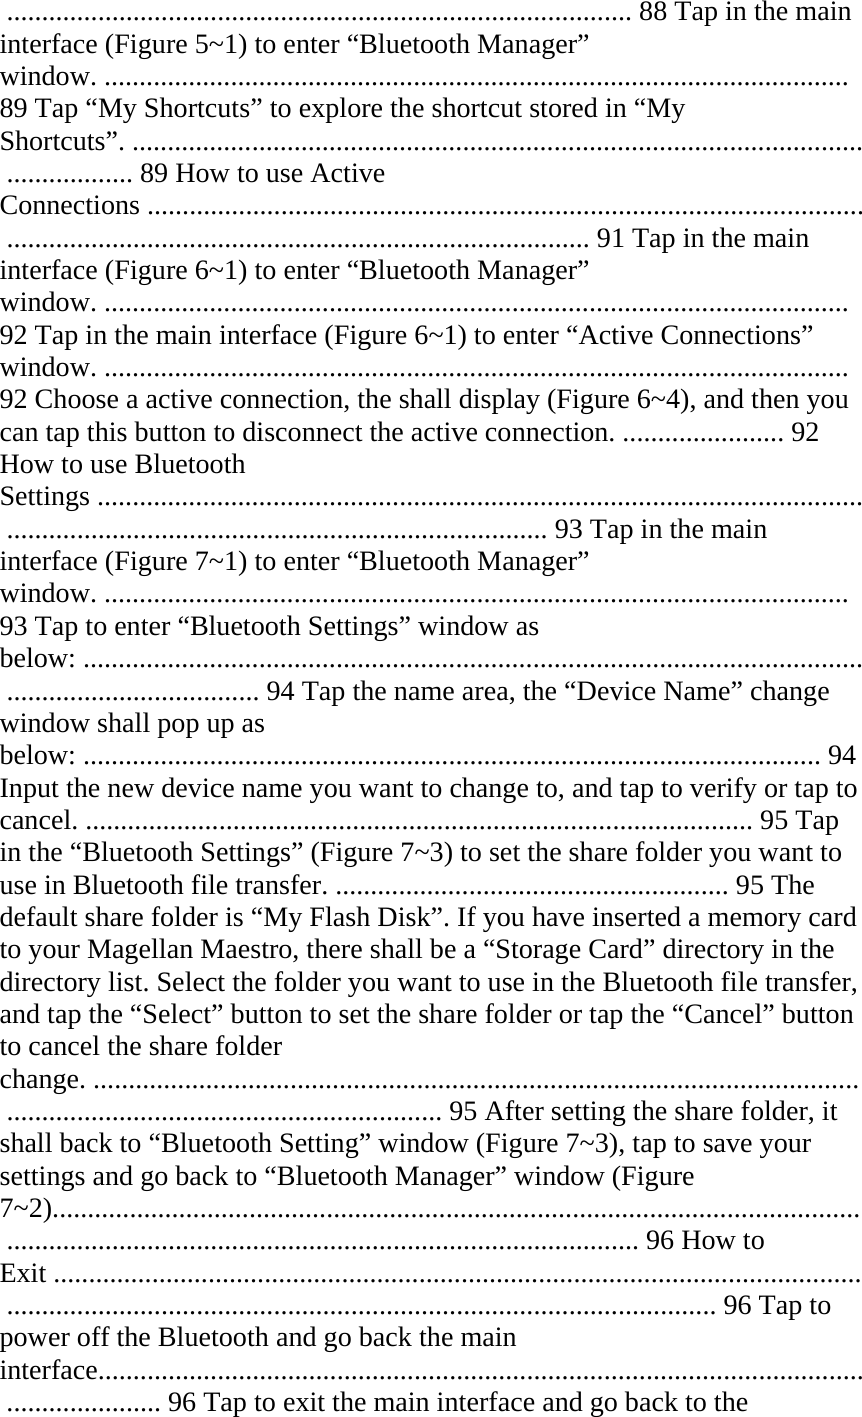  ......................................................................................... 88 Tap in the main interface (Figure 5~1) to enter “Bluetooth Manager” window. .......................................................................................................... 89 Tap “My Shortcuts” to explore the shortcut stored in “My Shortcuts”. ........................................................................................................ .................. 89 How to use Active Connections ...................................................................................................... ................................................................................... 91 Tap in the main interface (Figure 6~1) to enter “Bluetooth Manager” window. .......................................................................................................... 92 Tap in the main interface (Figure 6~1) to enter “Active Connections” window. .......................................................................................................... 92 Choose a active connection, the shall display (Figure 6~4), and then you can tap this button to disconnect the active connection. ....................... 92 How to use Bluetooth Settings ............................................................................................................. ............................................................................. 93 Tap in the main interface (Figure 7~1) to enter “Bluetooth Manager” window. .......................................................................................................... 93 Tap to enter “Bluetooth Settings” window as below: ............................................................................................................... .................................... 94 Tap the name area, the “Device Name” change window shall pop up as below: ......................................................................................................... 94 Input the new device name you want to change to, and tap to verify or tap to cancel. ............................................................................................... 95 Tap in the “Bluetooth Settings” (Figure 7~3) to set the share folder you want to use in Bluetooth file transfer. ........................................................ 95 The default share folder is “My Flash Disk”. If you have inserted a memory card to your Magellan Maestro, there shall be a “Storage Card” directory in the directory list. Select the folder you want to use in the Bluetooth file transfer, and tap the “Select” button to set the share folder or tap the “Cancel” button to cancel the share folder change. ............................................................................................................. .............................................................. 95 After setting the share folder, it shall back to “Bluetooth Setting” window (Figure 7~3), tap to save your settings and go back to “Bluetooth Manager” window (Figure 7~2)................................................................................................................... .......................................................................................... 96 How to Exit ................................................................................................................... ..................................................................................................... 96 Tap to power off the Bluetooth and go back the main interface............................................................................................................. ...................... 96 Tap to exit the main interface and go back to the 